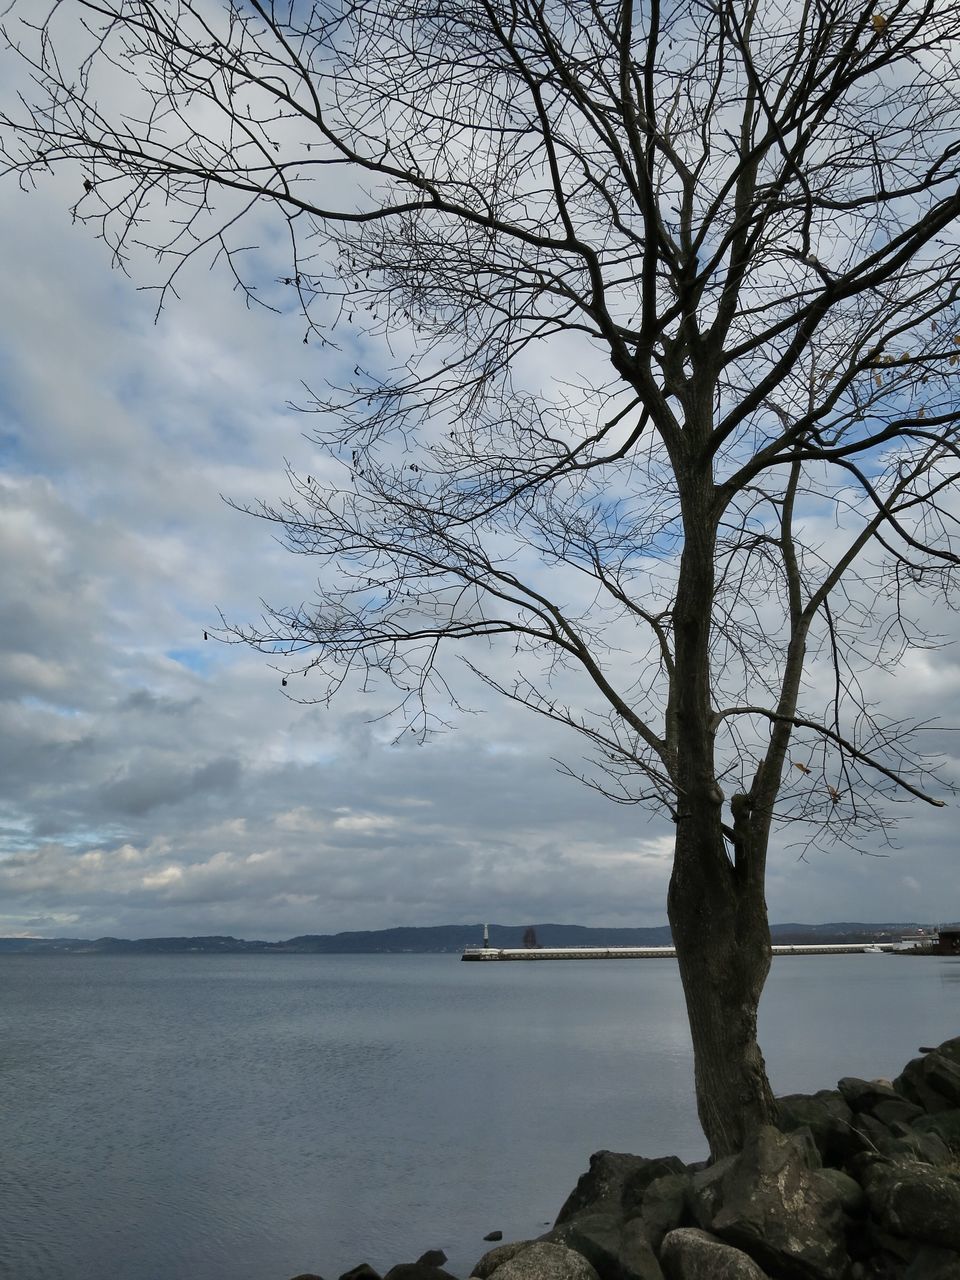 sky, water, tranquility, tranquil scene, bare tree, sea, scenics, tree, cloud - sky, beauty in nature, nature, branch, cloud, horizon over water, cloudy, lake, idyllic, tree trunk, calm, no people